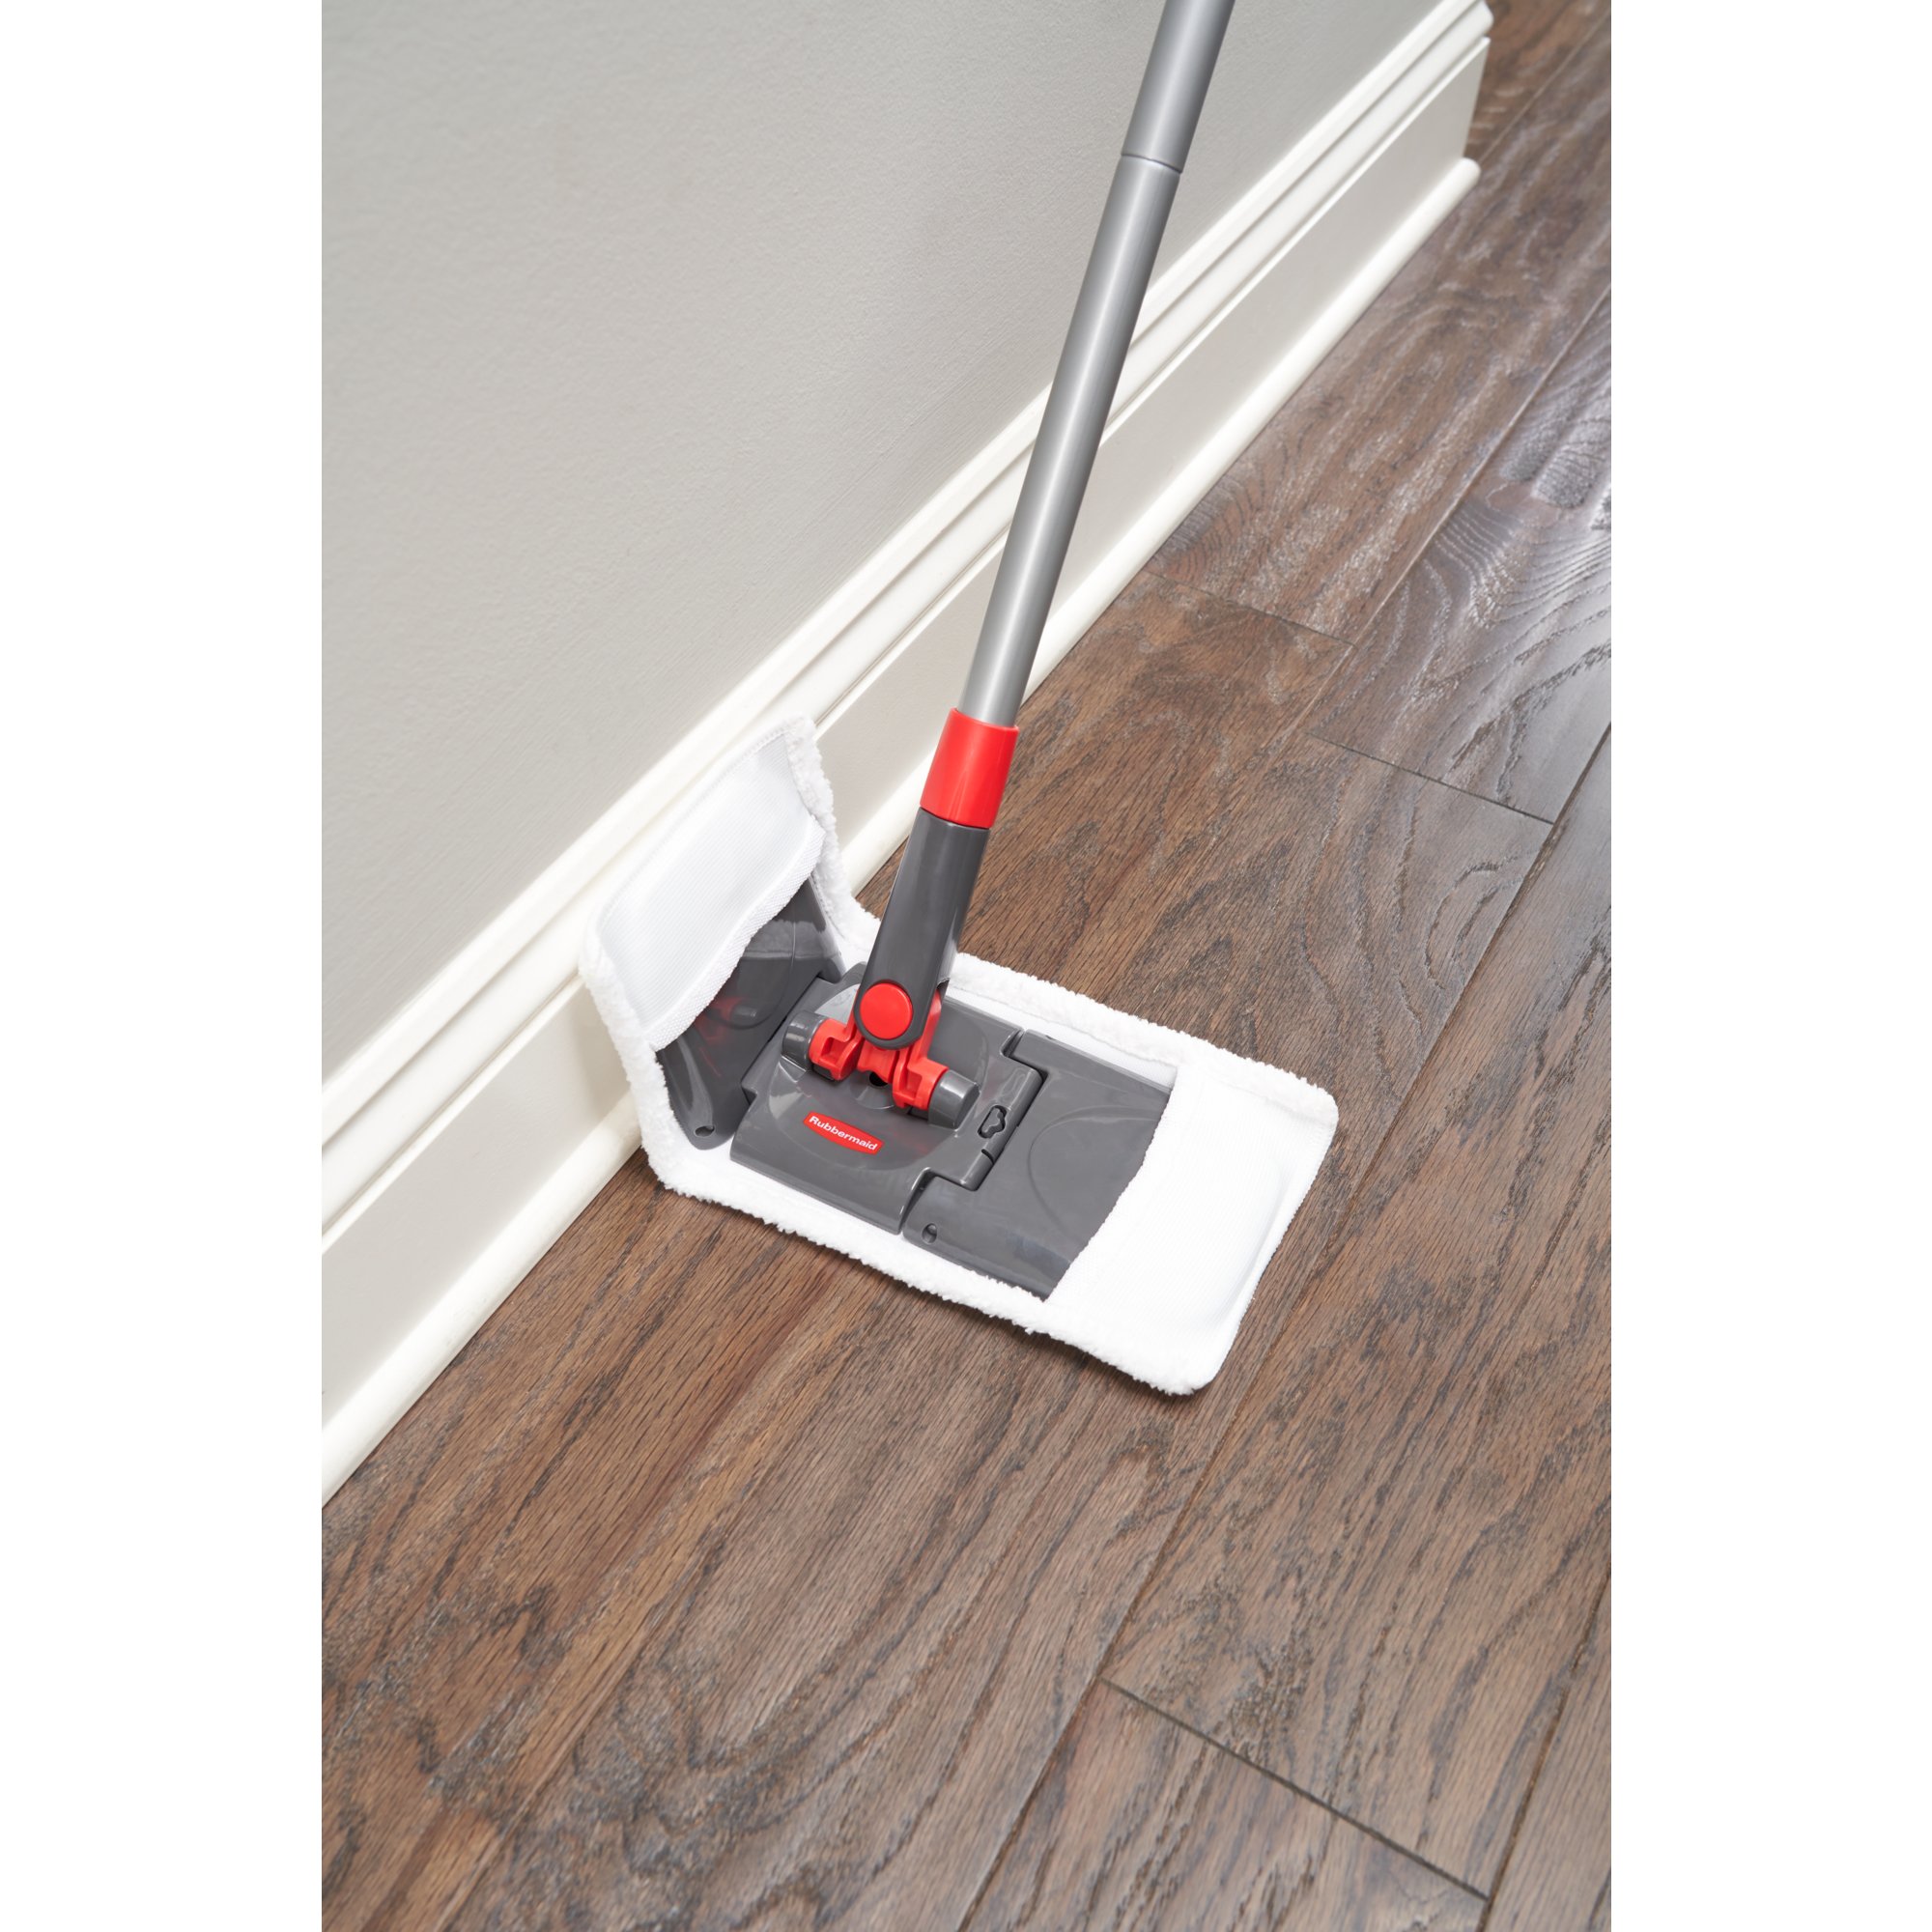 Quickie® Flat Spin Mop and Bucket System